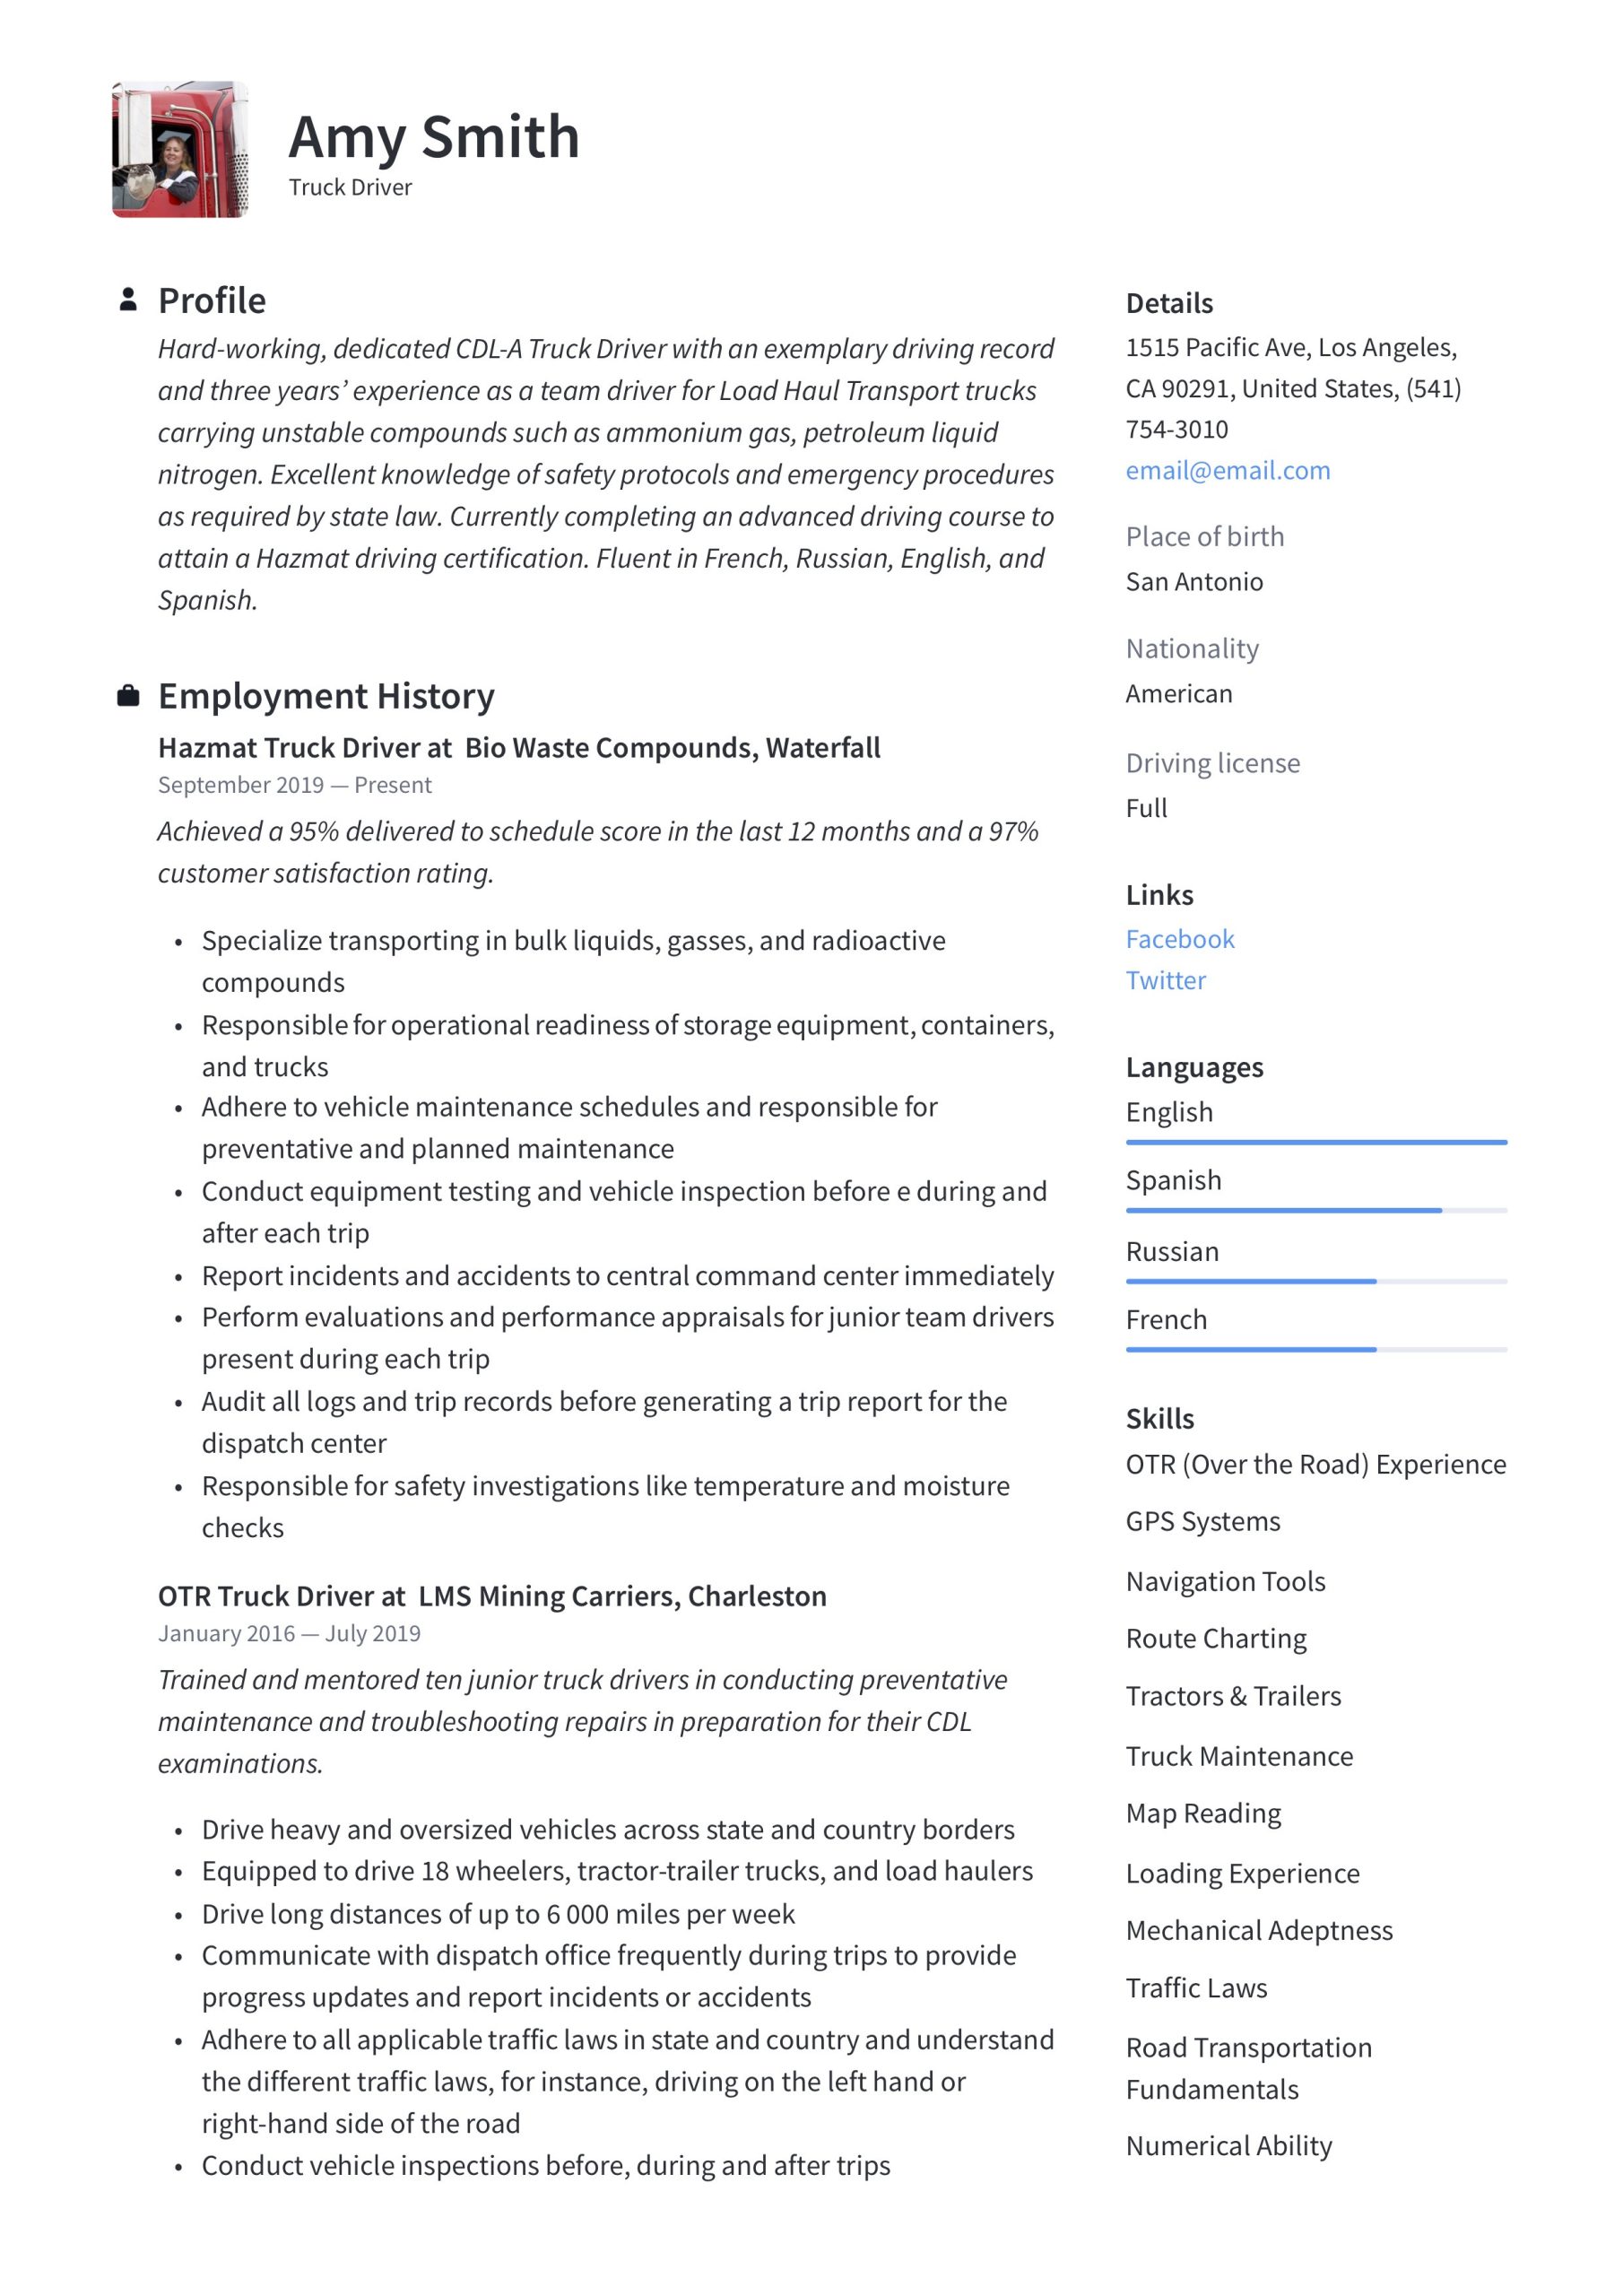 Sample Resume for Truck Driving Job Truck Driver Resume & Writing Guide  12 Resume Examples 2019